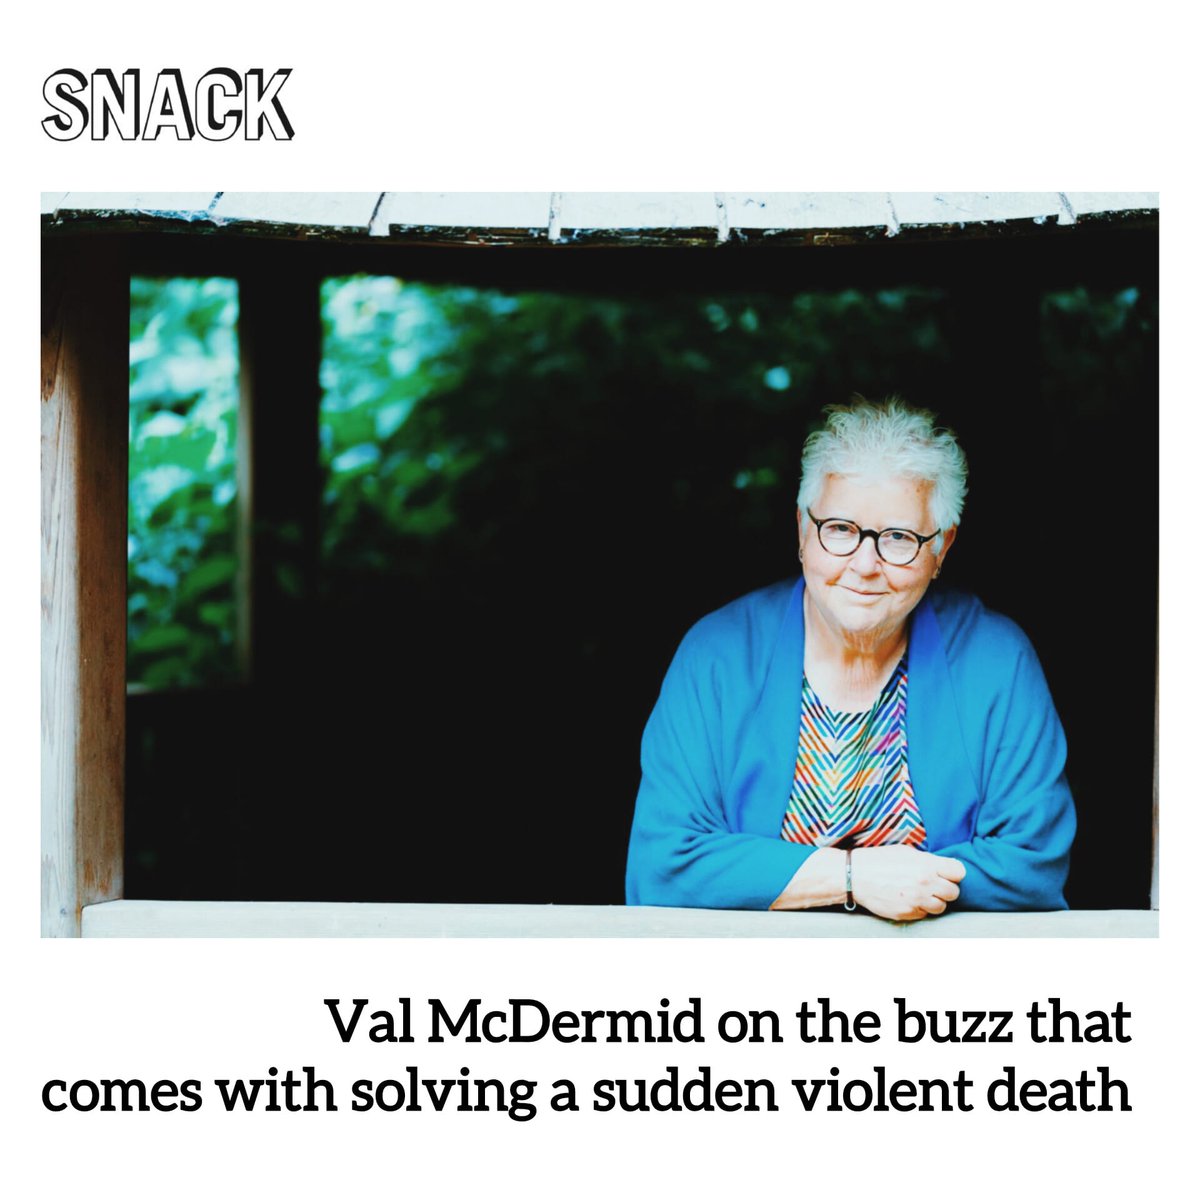 INTERVIEW 💛 @valmcdermid on Darkland Tales, why the story of Queen Macbeth appealed, and her thoughts on the popularity of crime fiction. An interview with @ScotsWhayHae for this month's SNACK Online and in print snackmag.co.uk/val-mcdermid-o…